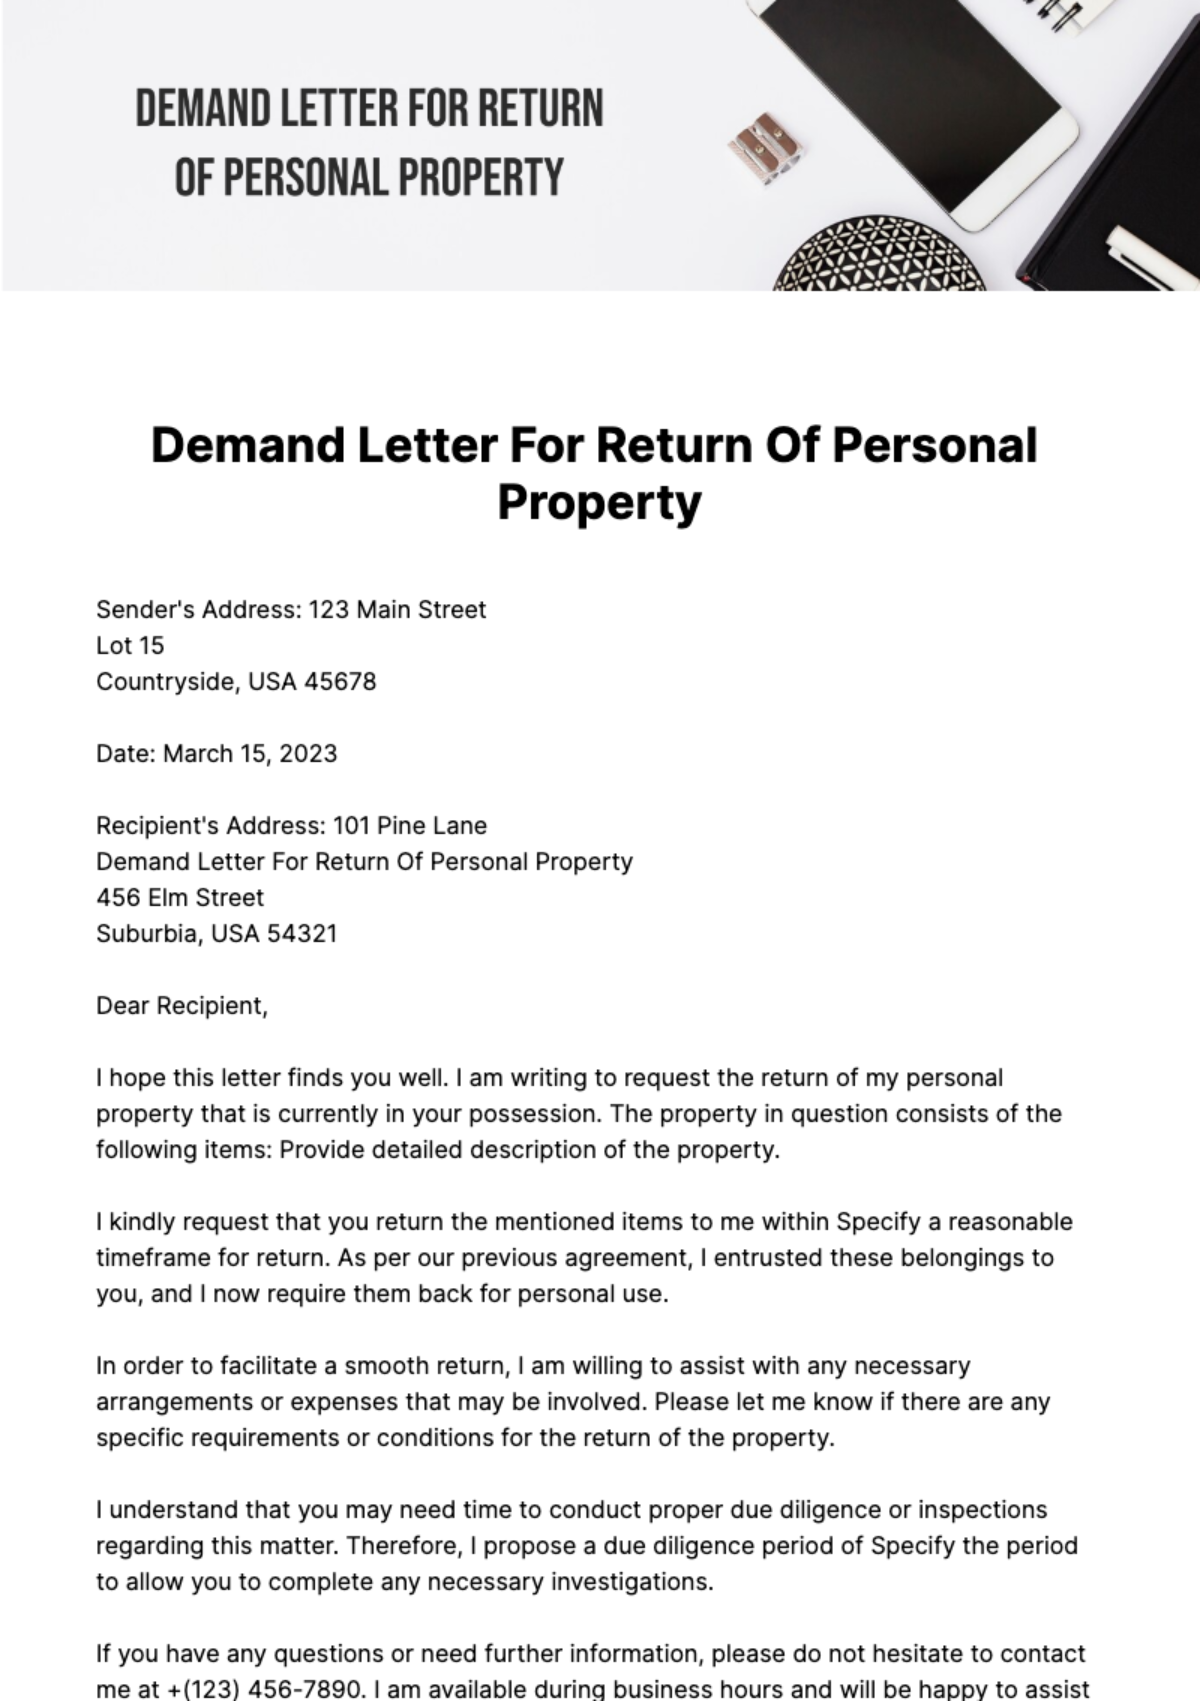 Demand Letter For Return Of Personal Property Template